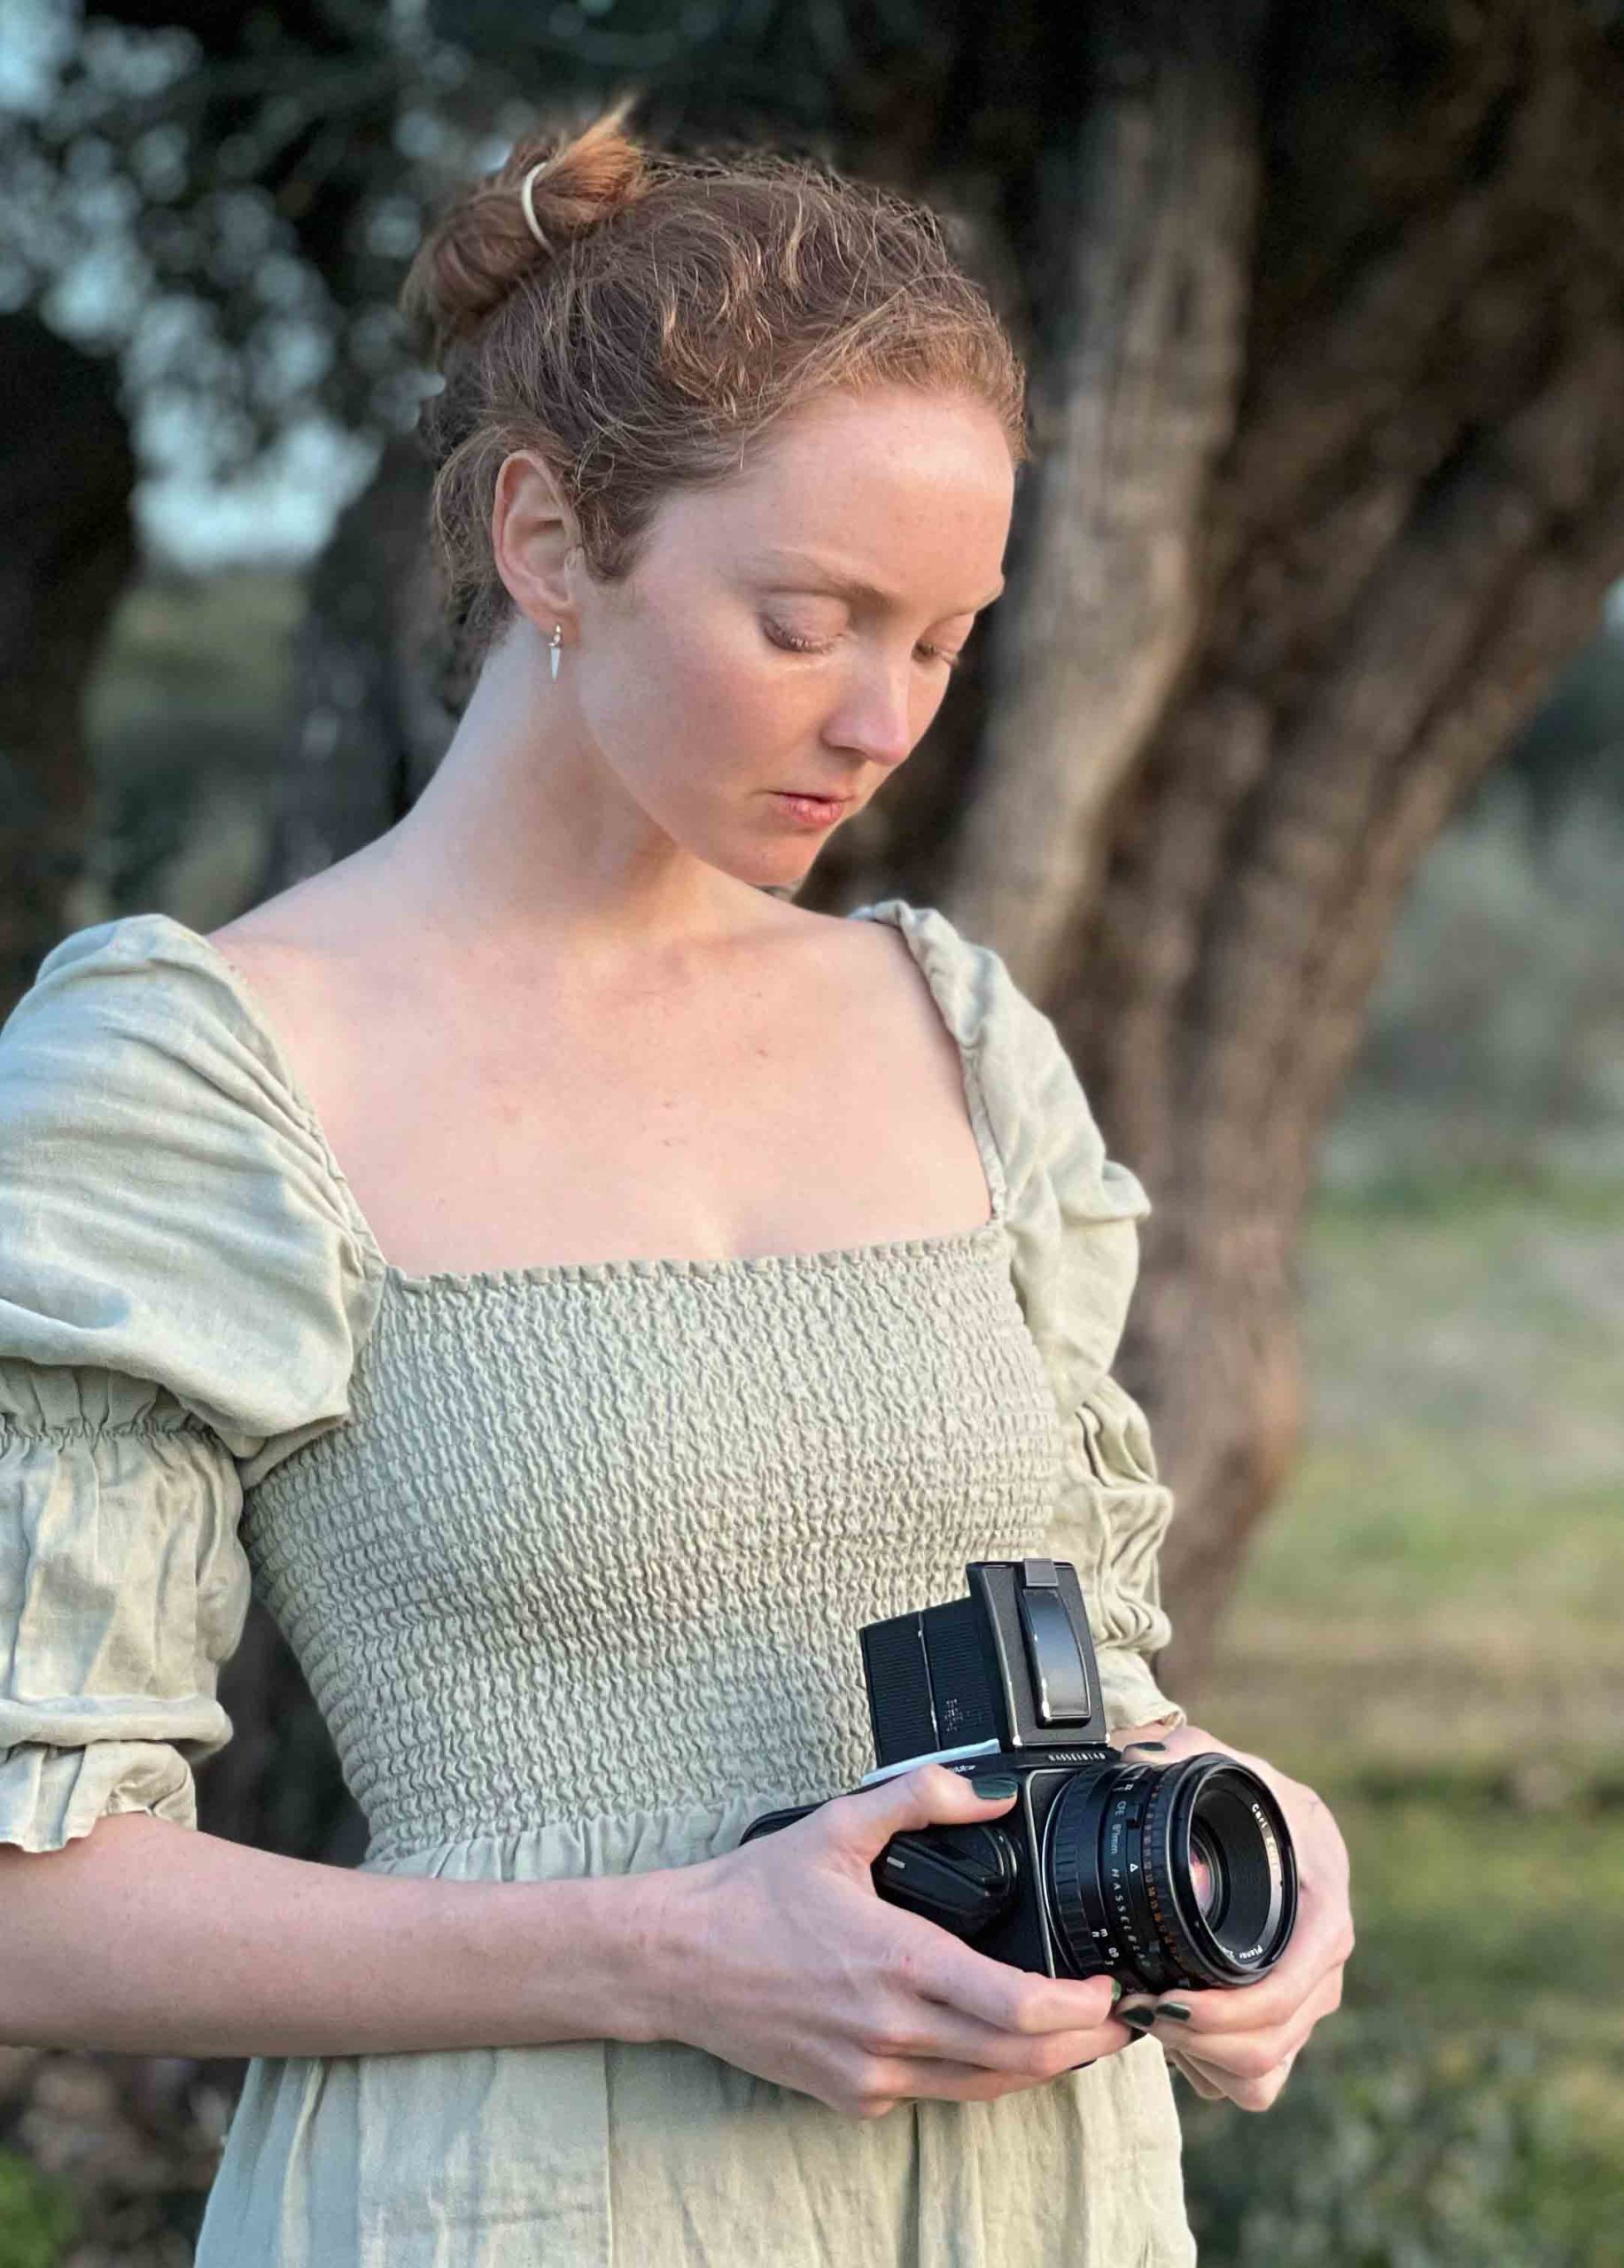 Actress and environmentalist Lily Cole taking in and capturing the Alentejo countryside